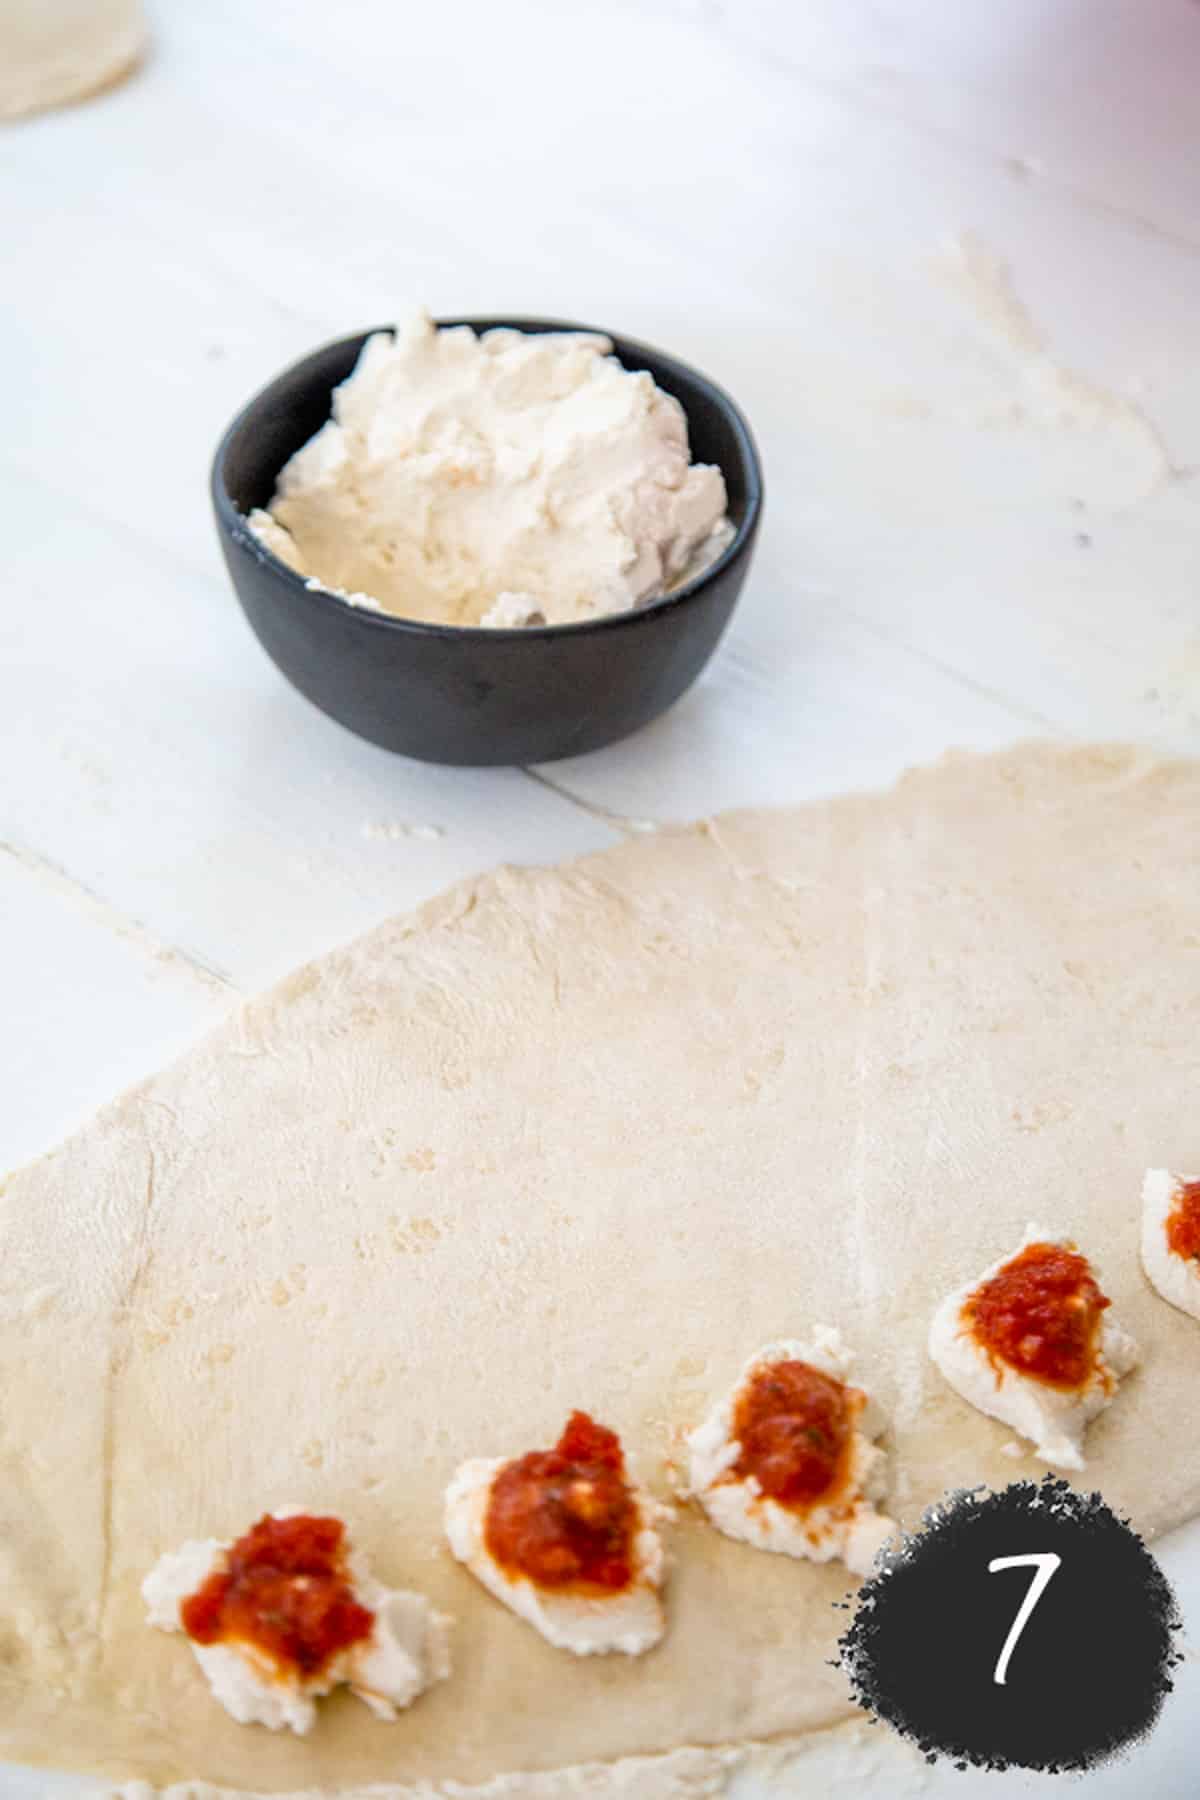 Rolled out pizza dough with ricotta cheese and pizza sauce.